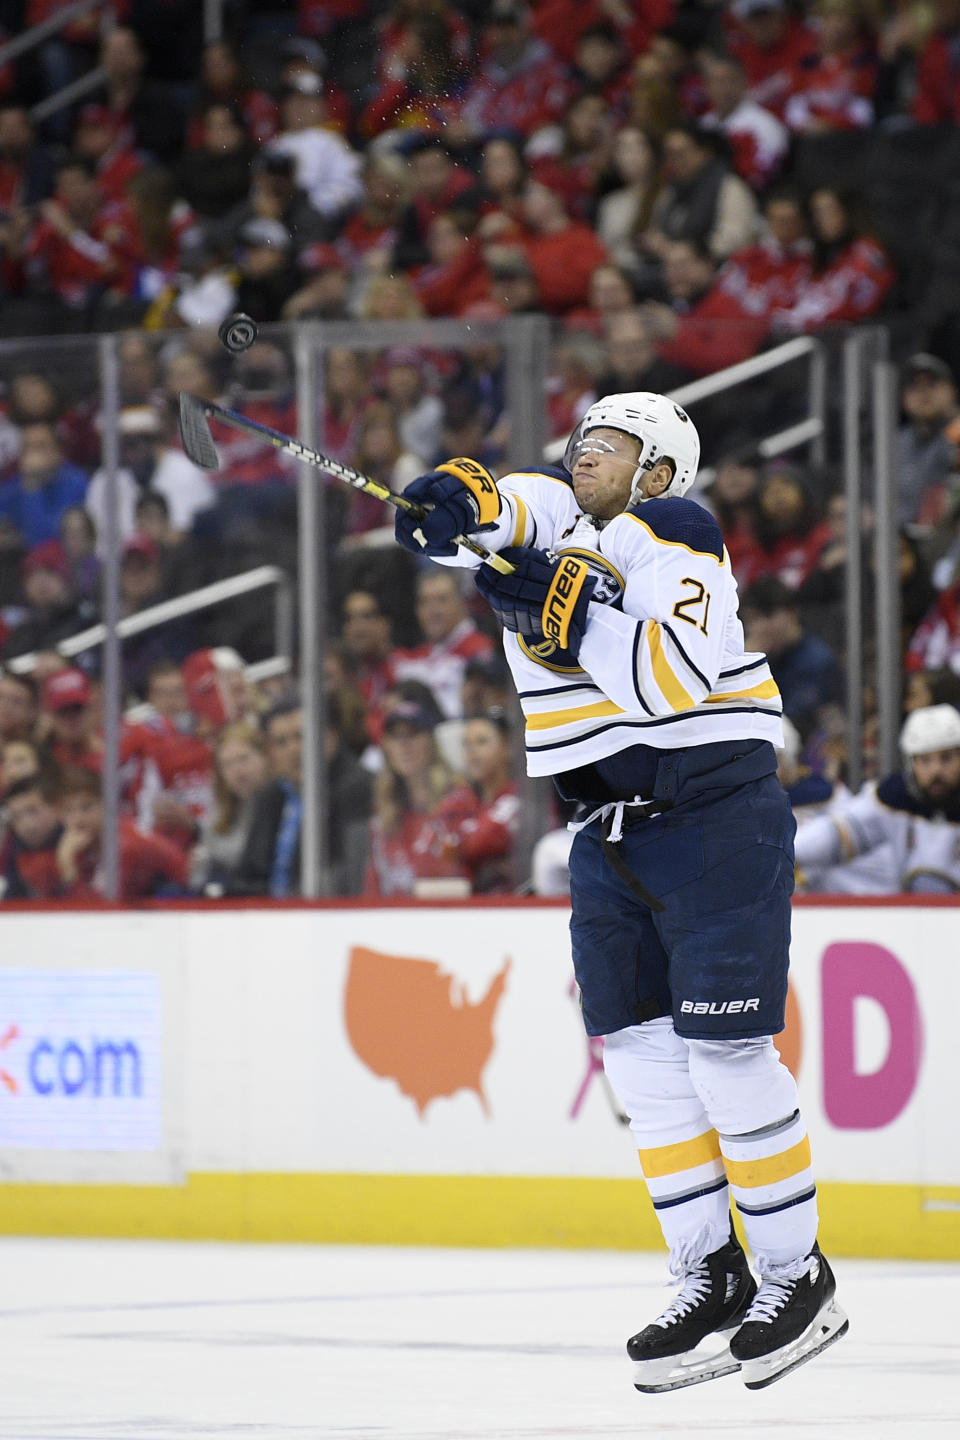 Buffalo Sabres right wing Kyle Okposo (21) swings at the airborne puck during the first period of an NHL hockey game against the Washington Capitals, Saturday, Dec. 15, 2018, in Washington. (AP Photo/Nick Wass)